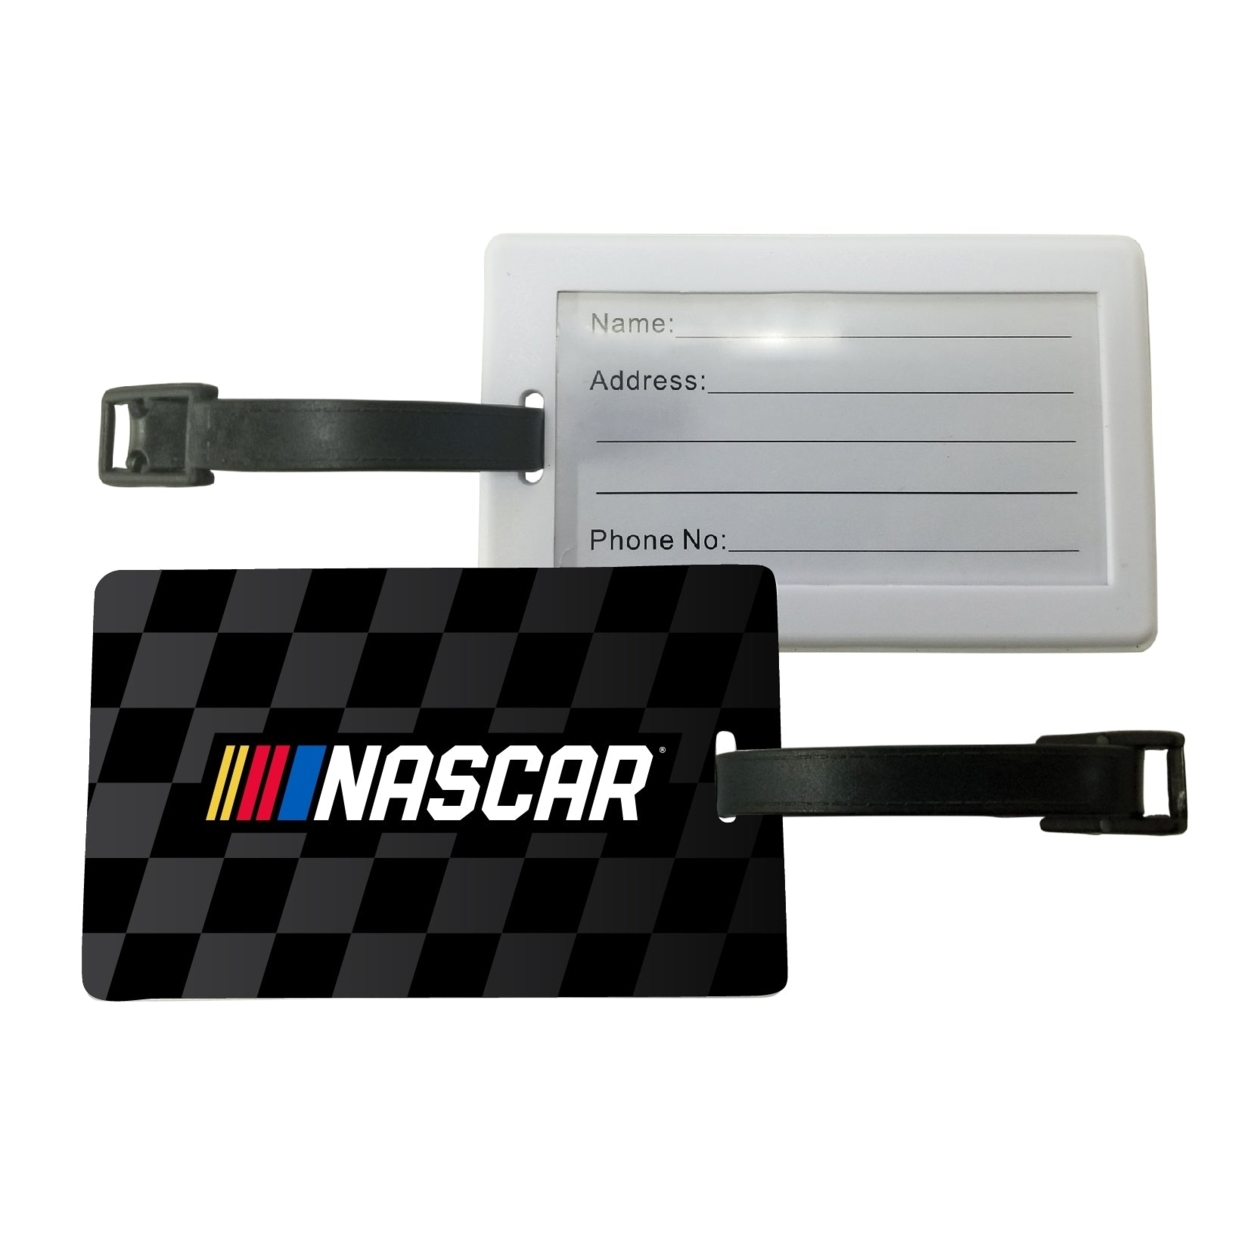 NASCAR Officially Licensed Luggage Tag